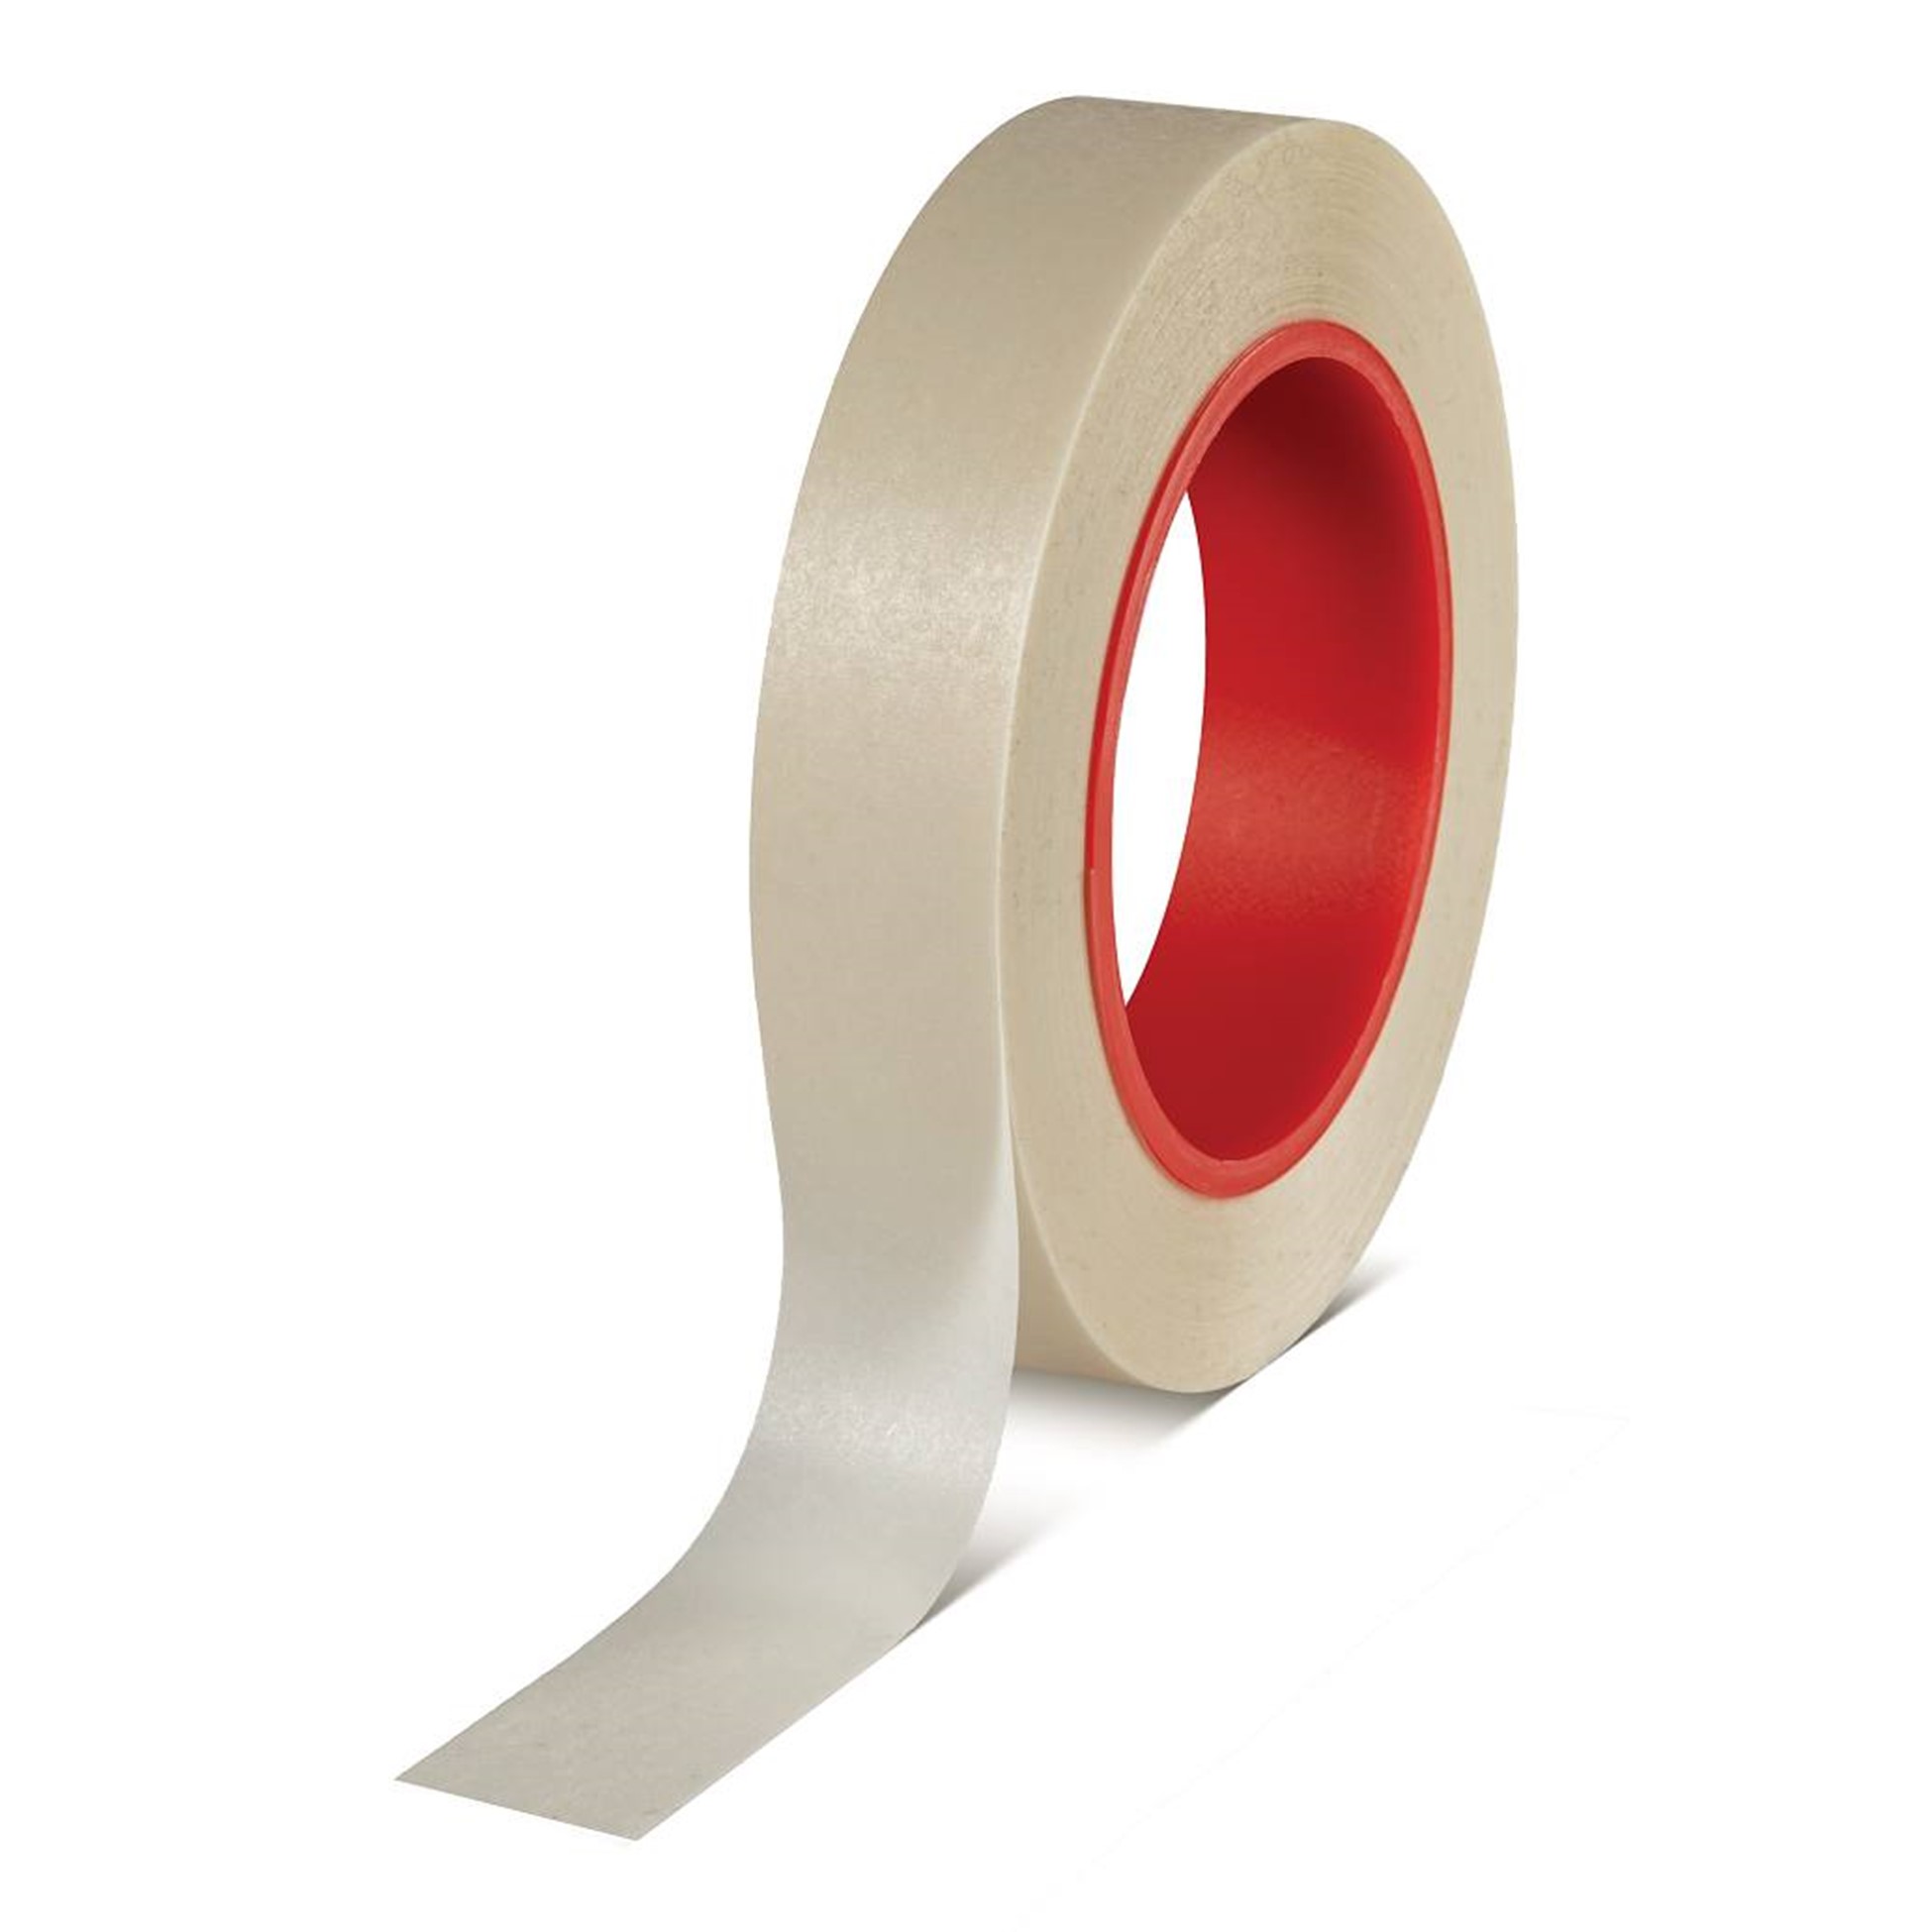 3M Masking Tape 2307, Tan Color, General Purpose, Rubber Adhesive,  Crepe-Paper Backing, 24 mm x 55 m, 5.2 mil, 1 Roll